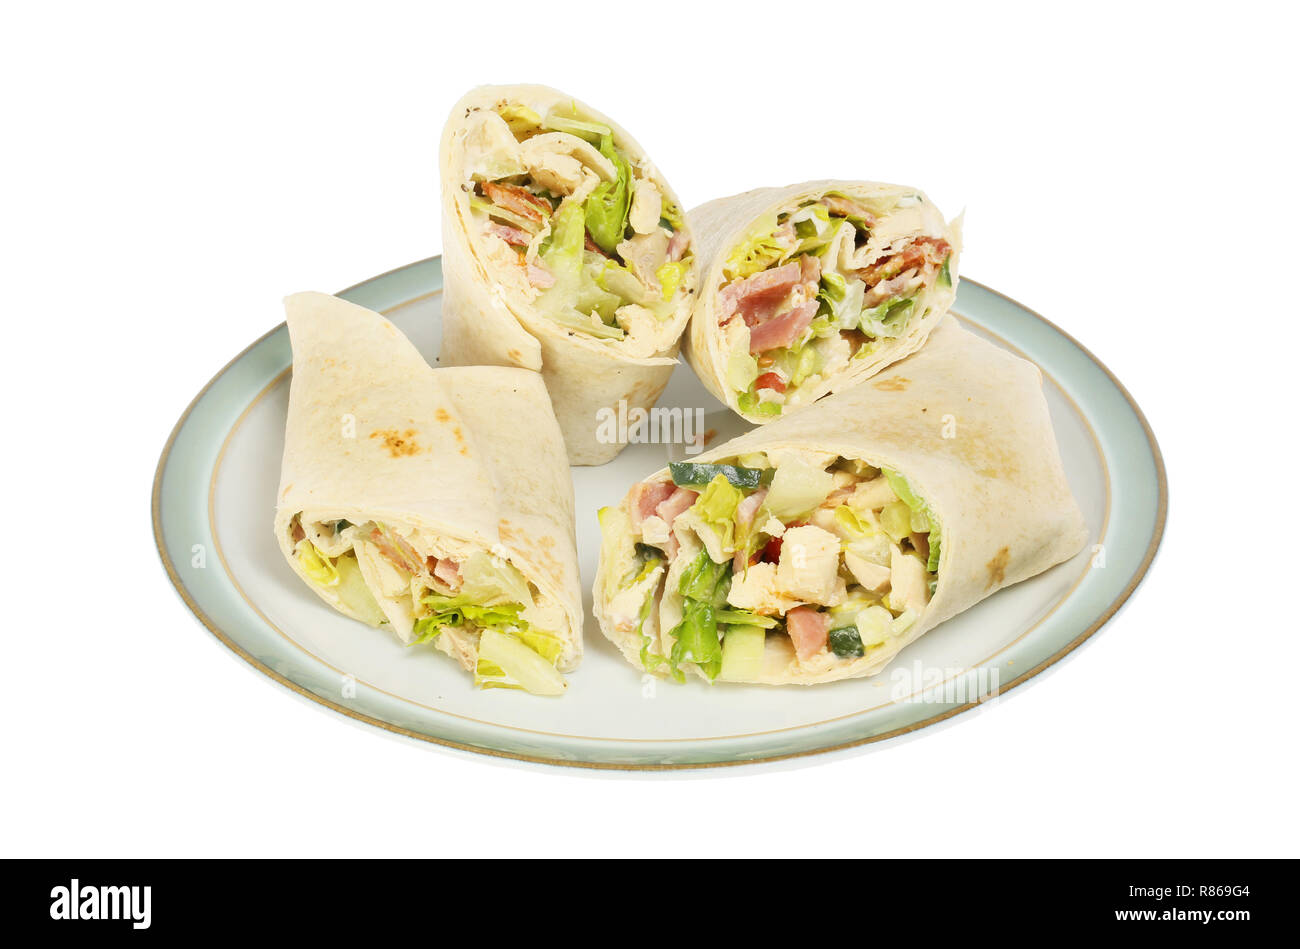 Chicken, bacon and lettuce sandwich wraps on a plate isolated against white Stock Photo